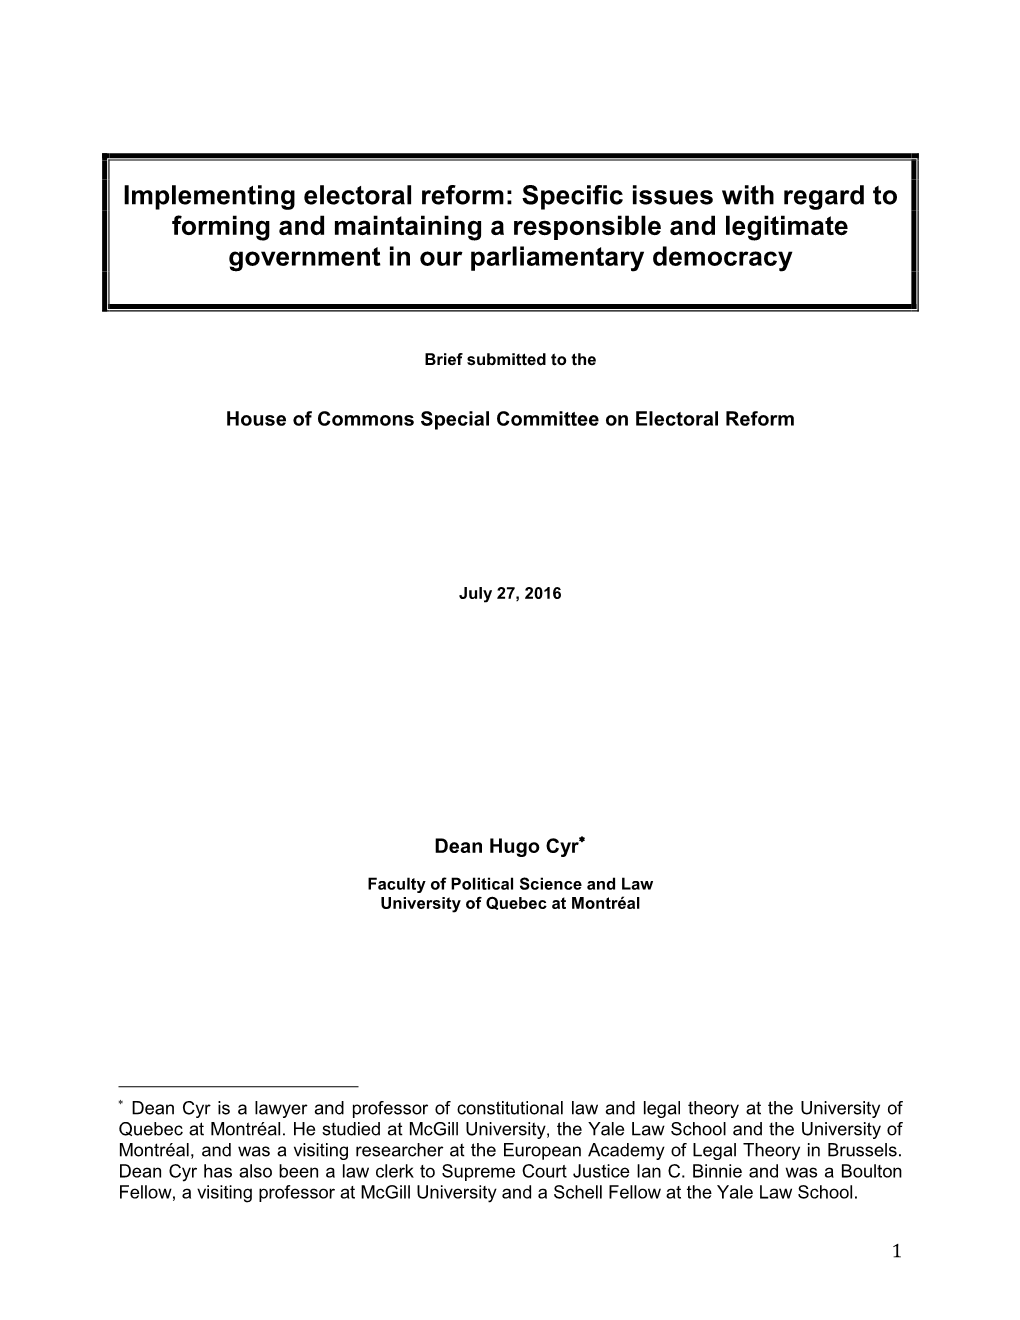 Implementing Electoral Reform: Specific Issues with Regard to Forming and Maintaining a Responsible and Legitimate Government in Our Parliamentary Democracy